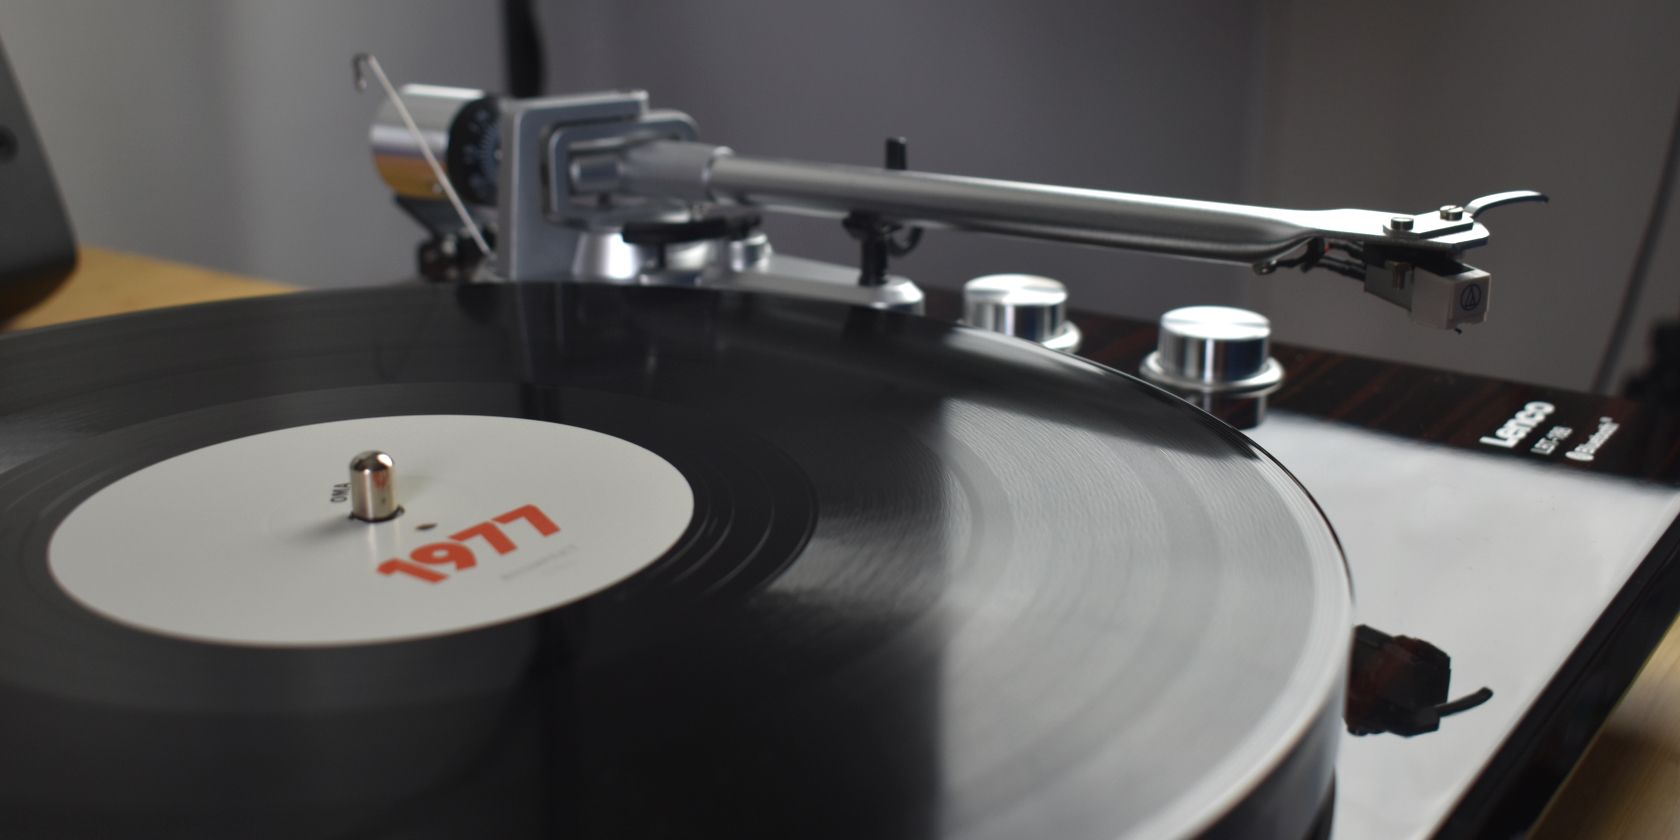 Review: Complete Belt-Driven Bluetooth Turntable Delivers LBT-188WA Lenco Package